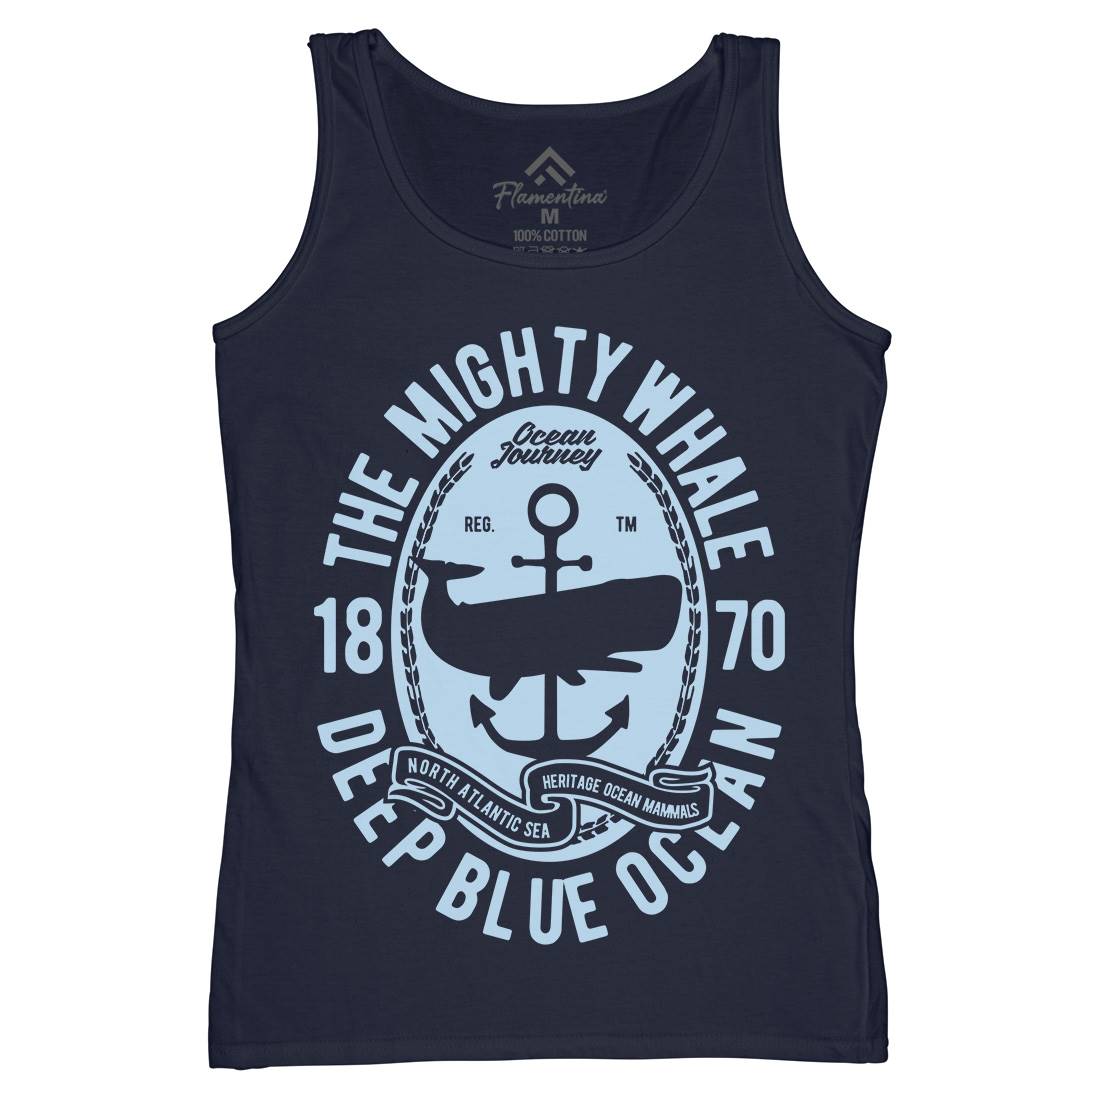 The Mighty Whale Womens Organic Tank Top Vest Navy B466